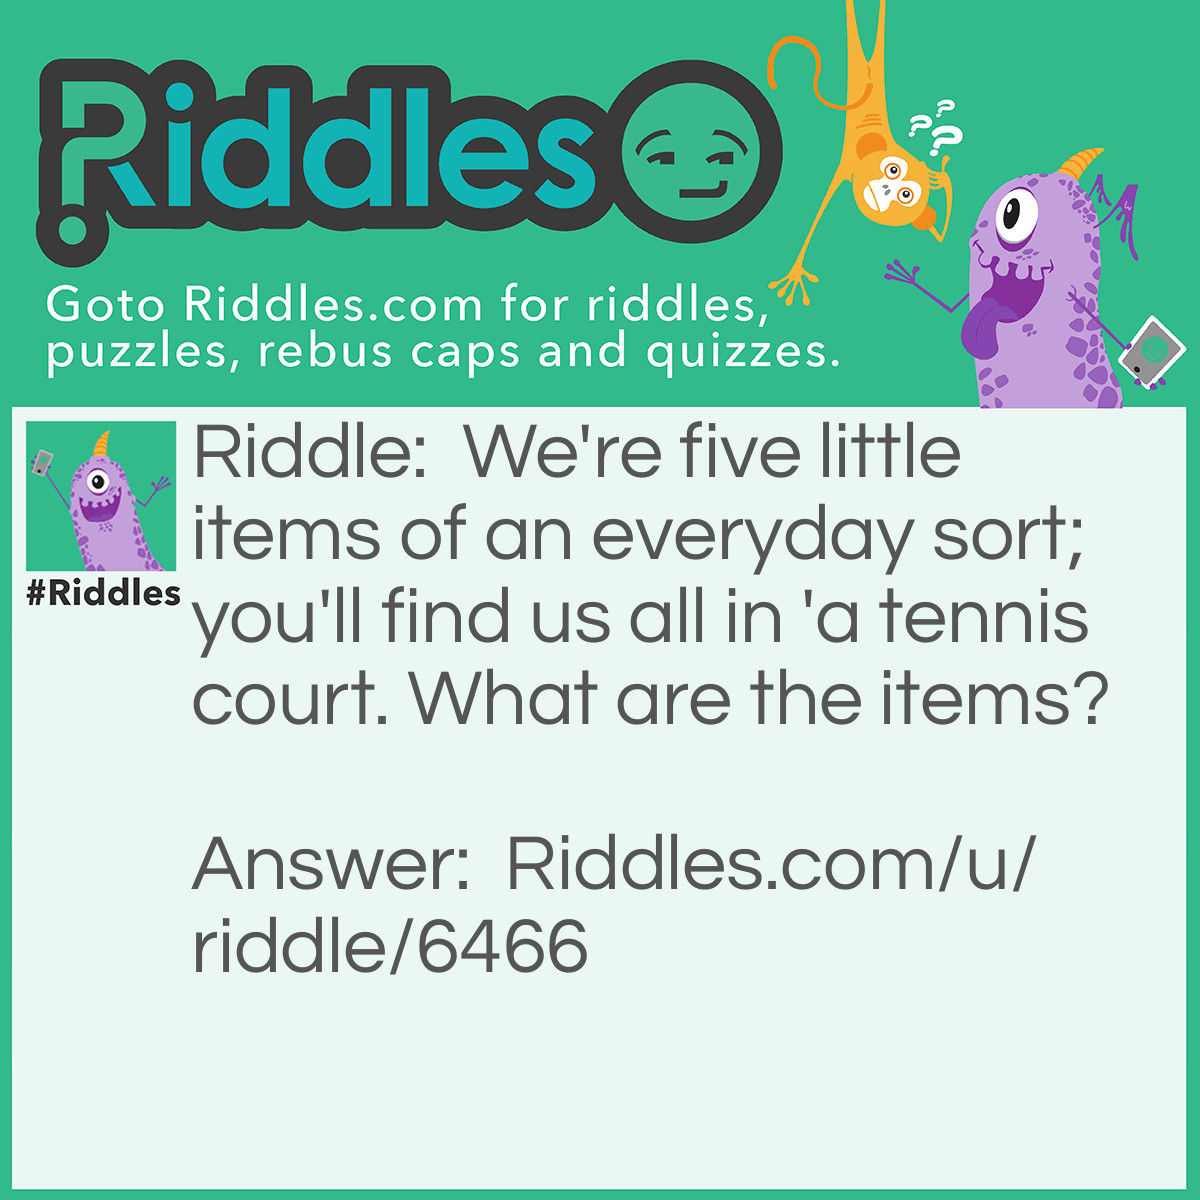 Riddle: We're five little items of an everyday sort; you'll find us all in 'a tennis court. What are the items? Answer: Vowels.